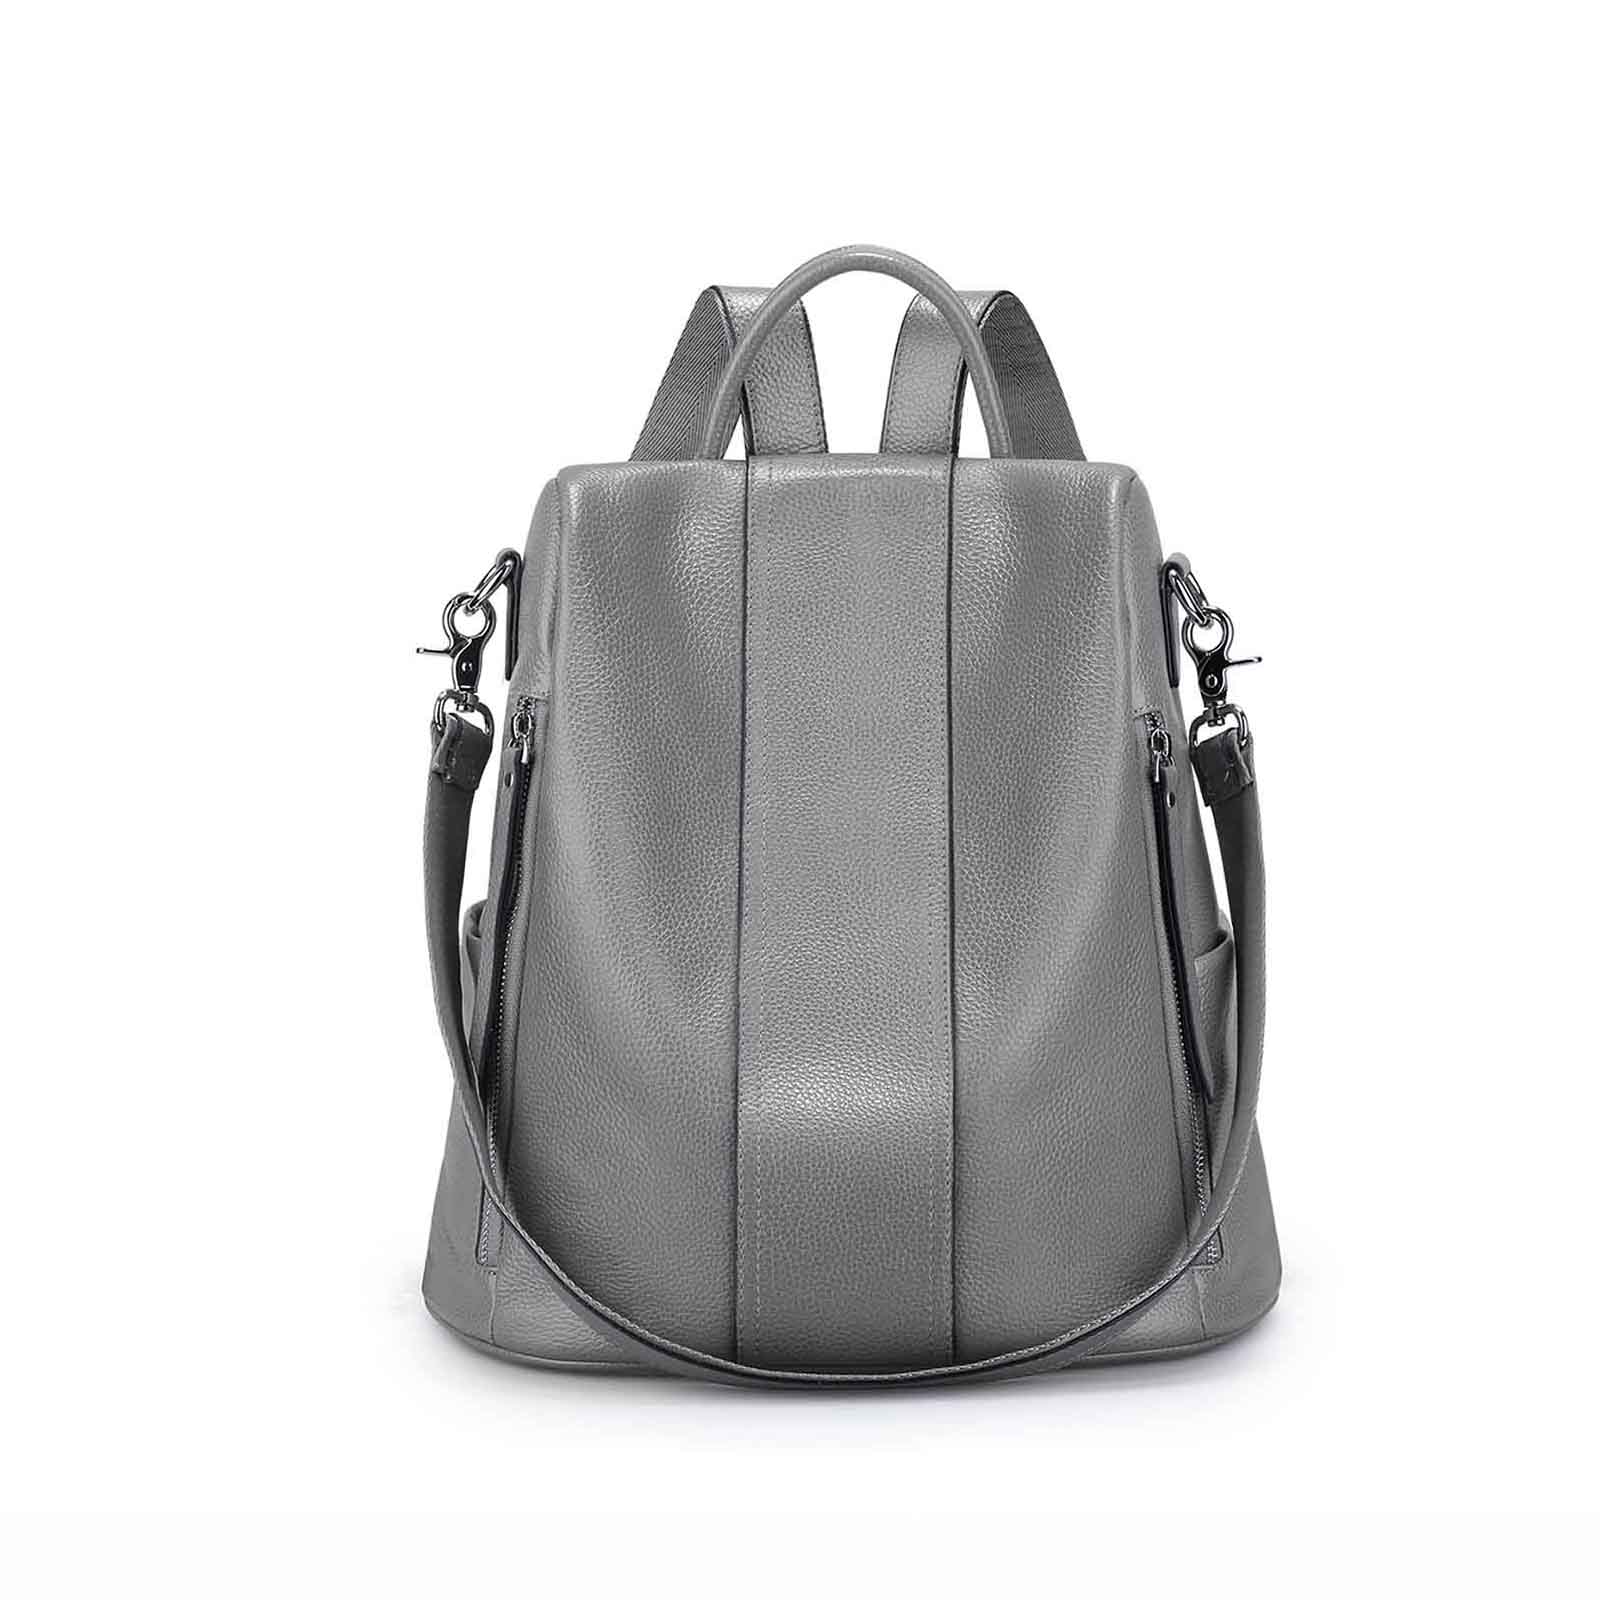  S-ZONE Leather Backpack Purses for Women Antitheft Soft Rucksack  Ladies Shoulder Bag Medium : Clothing, Shoes & Jewelry